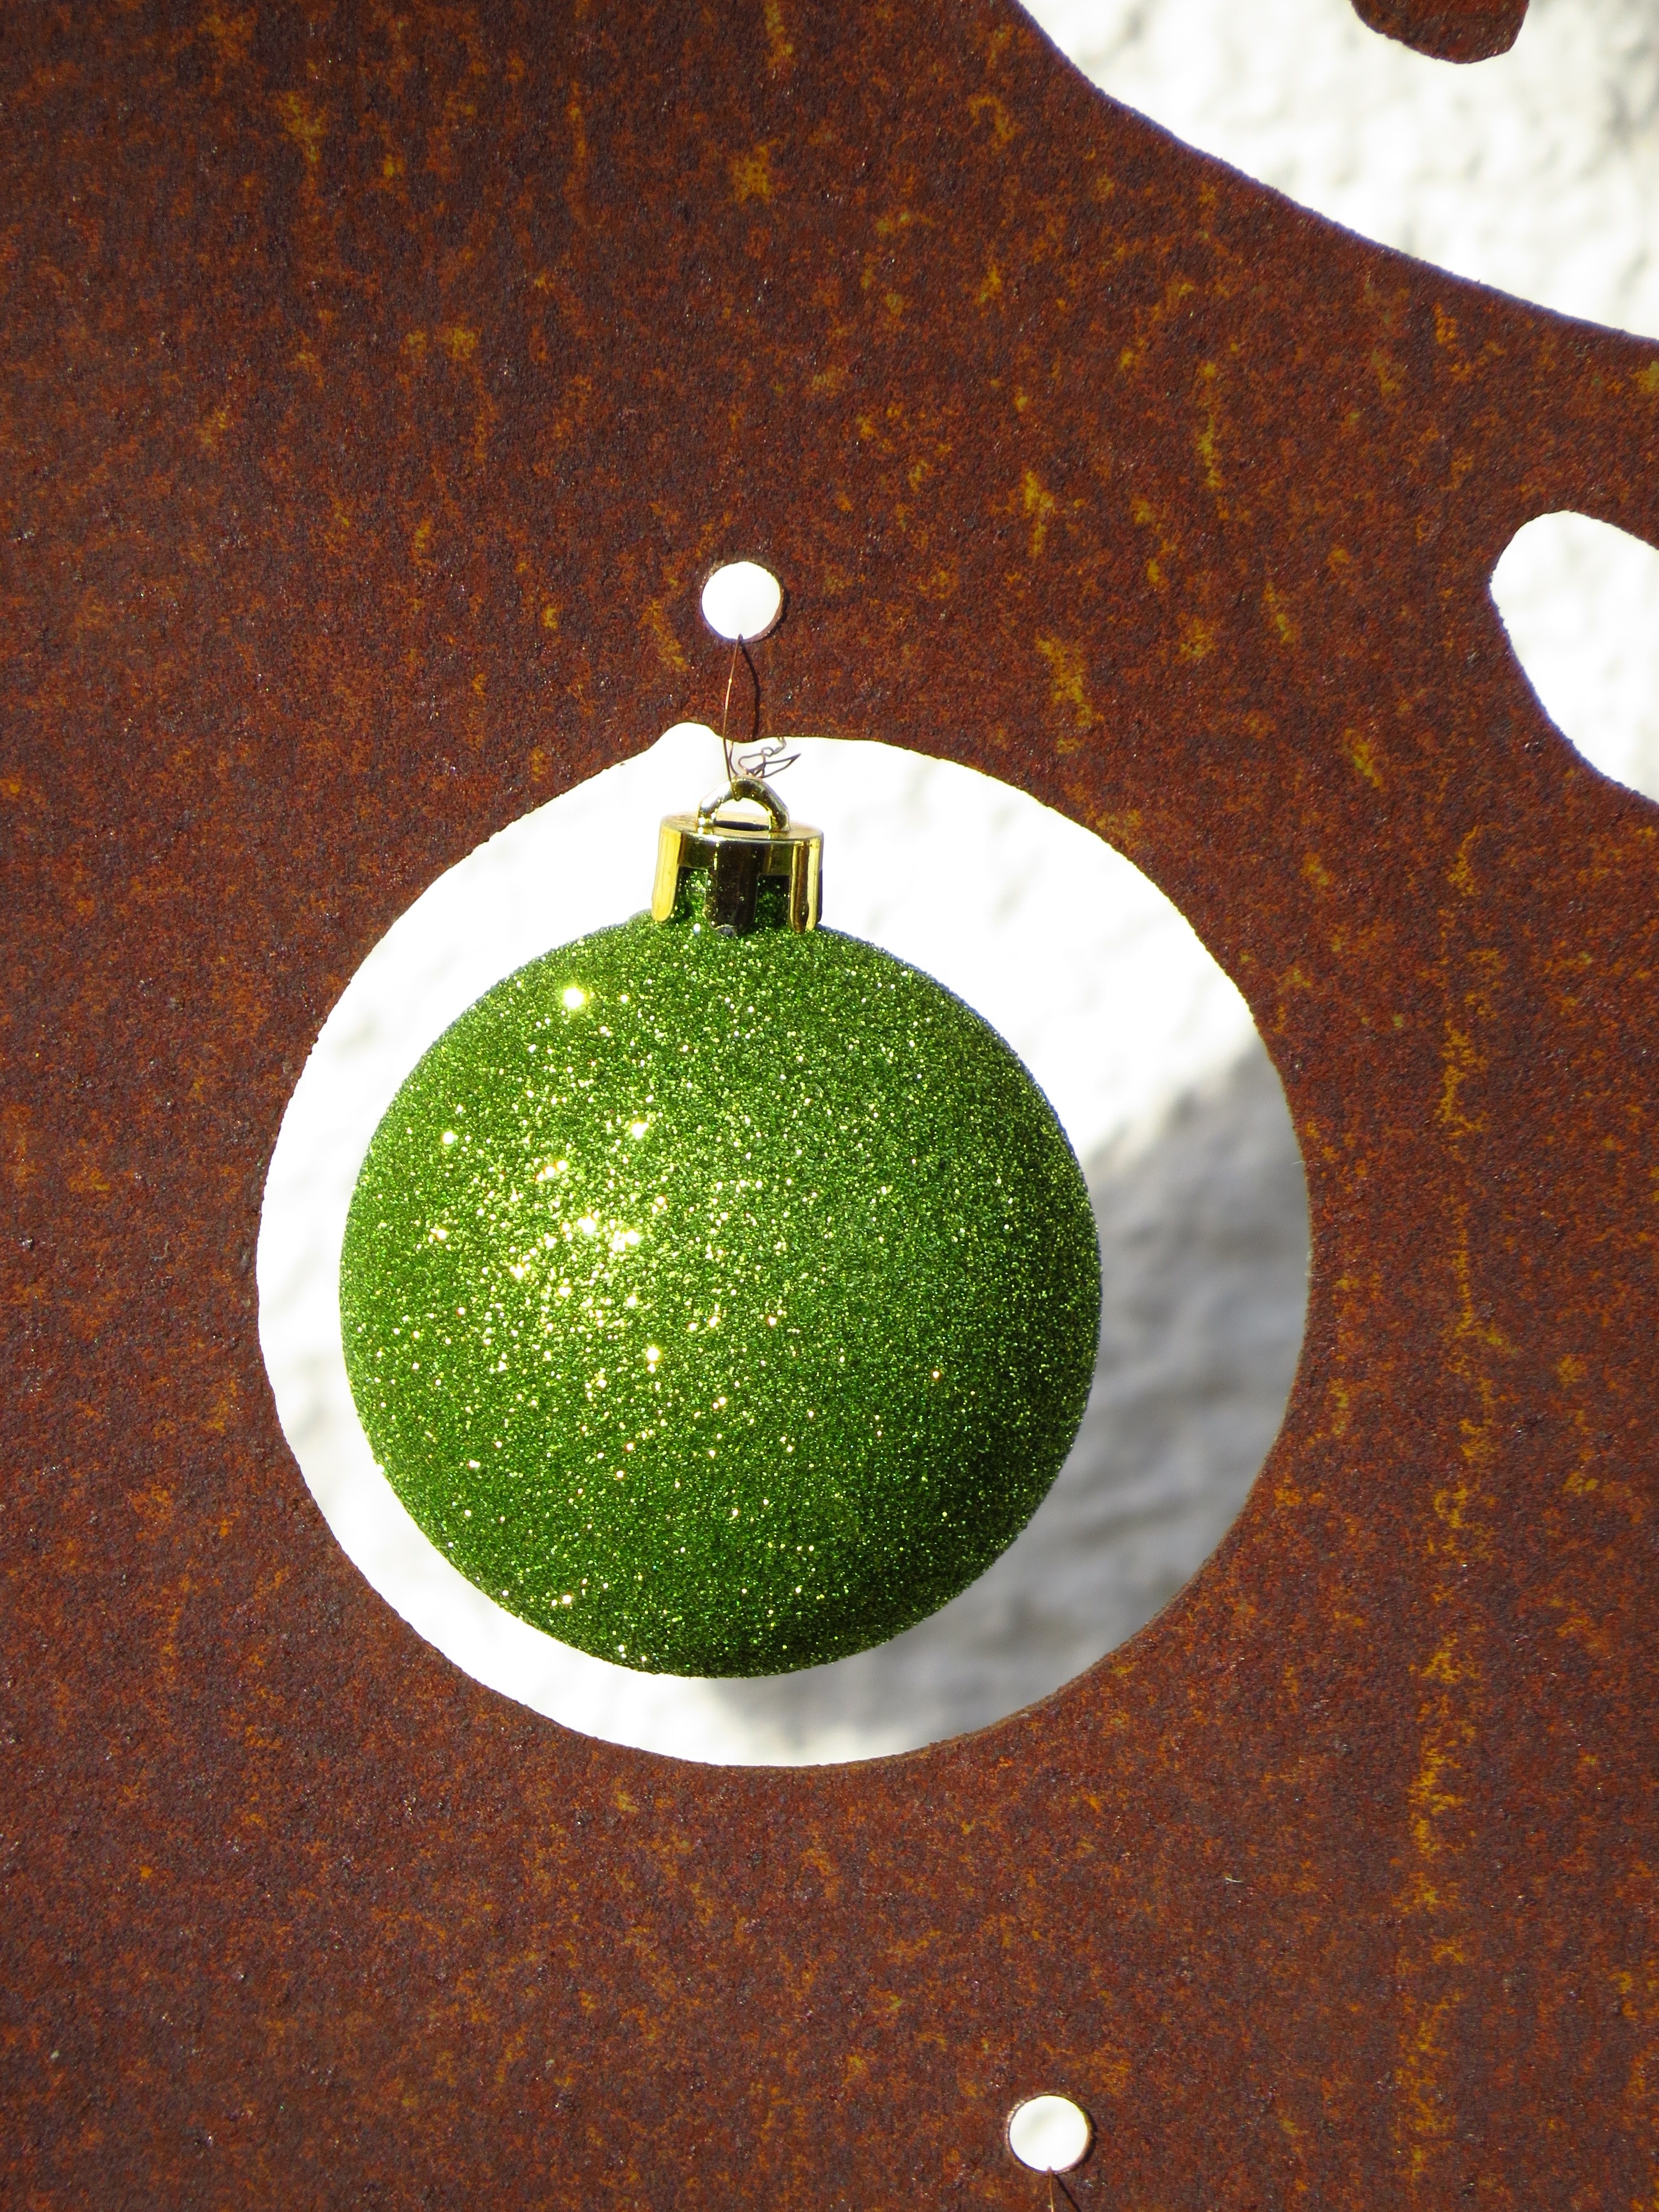 Glass Ball, Weihnachstkugel, Ball, green color, healthy eating